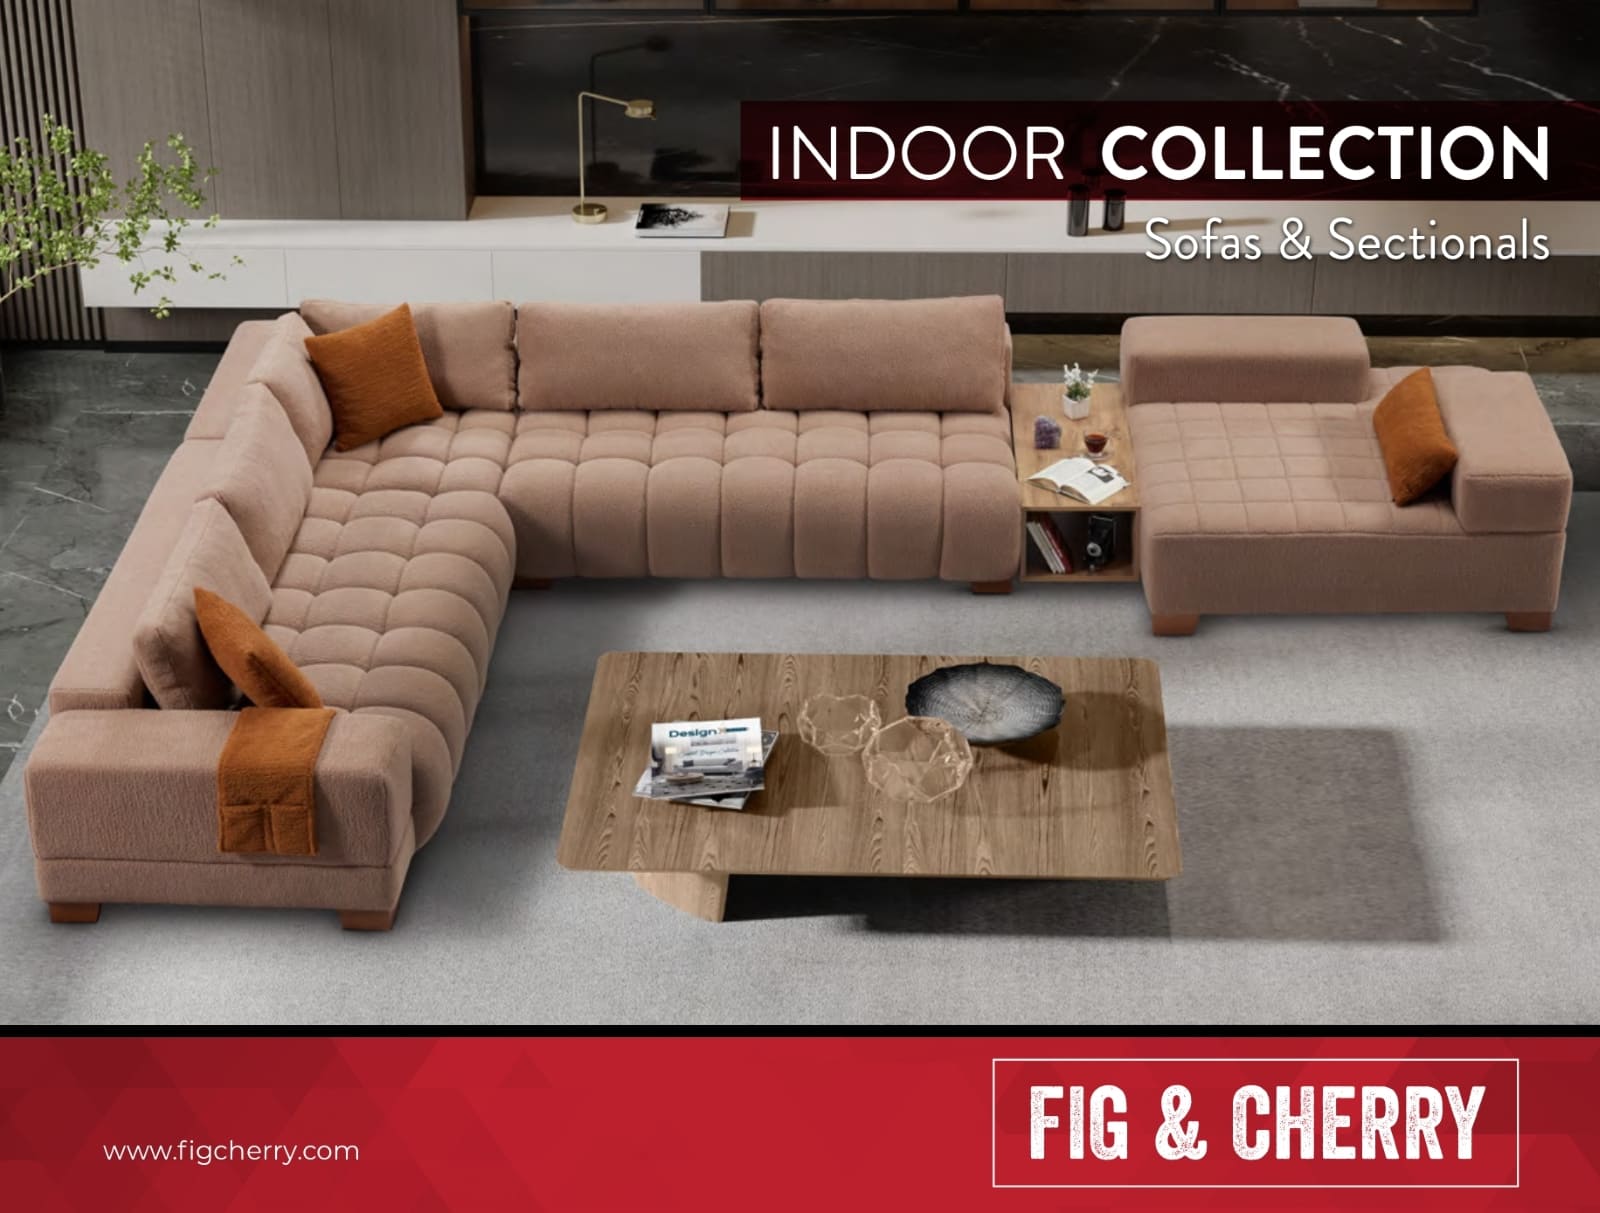 Fig & Cherry Indoor Collection (Sofas and Sectionals) Catalog (1)